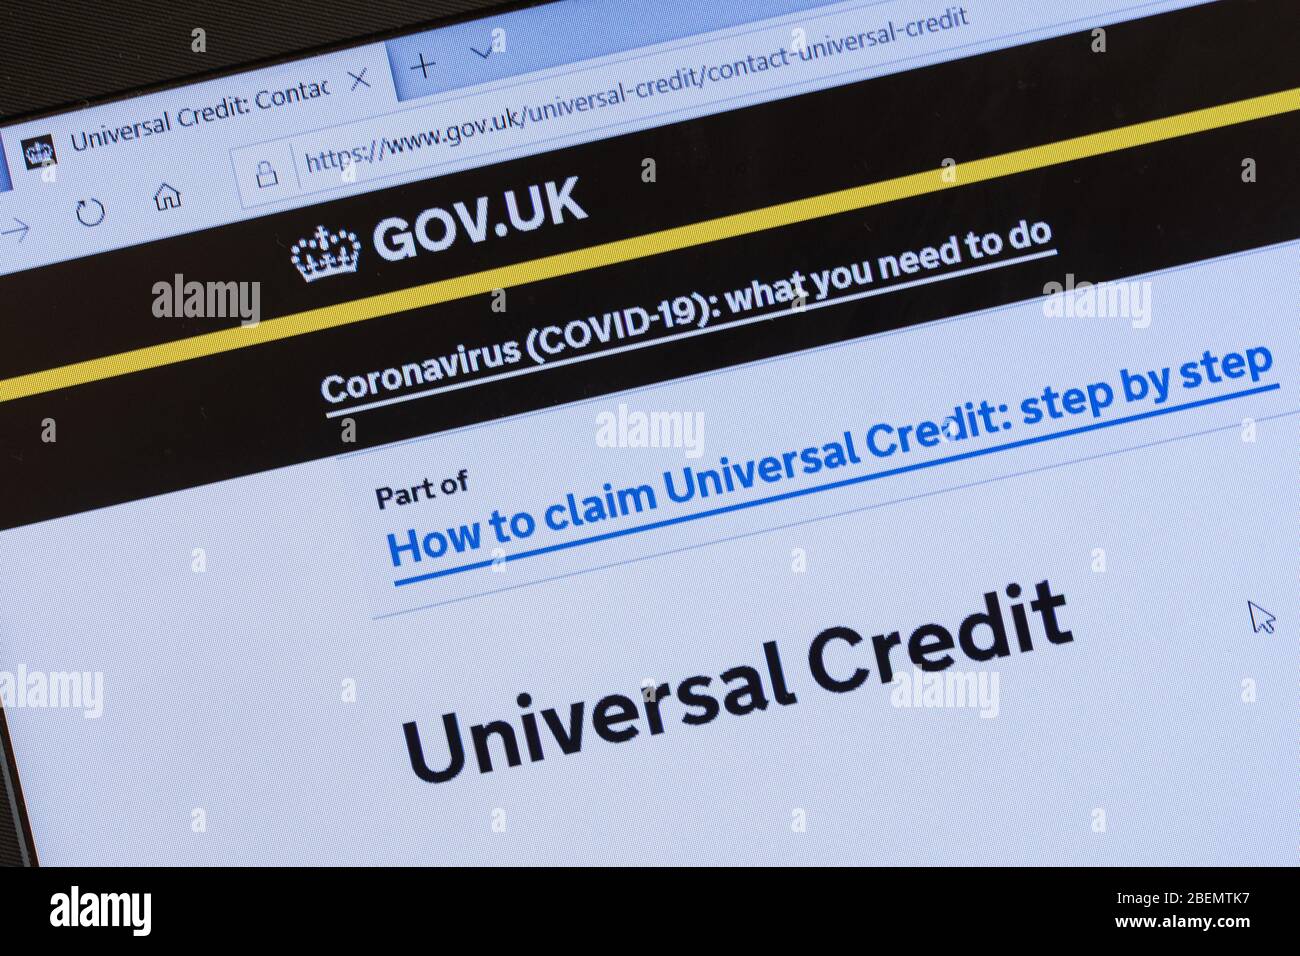 14 April 2020. There has been a large increase in the number of people applying for Universal Credit in the last couple of weeks due to loss of income during the coronavirus covid-19 pandemic. Stock Photo